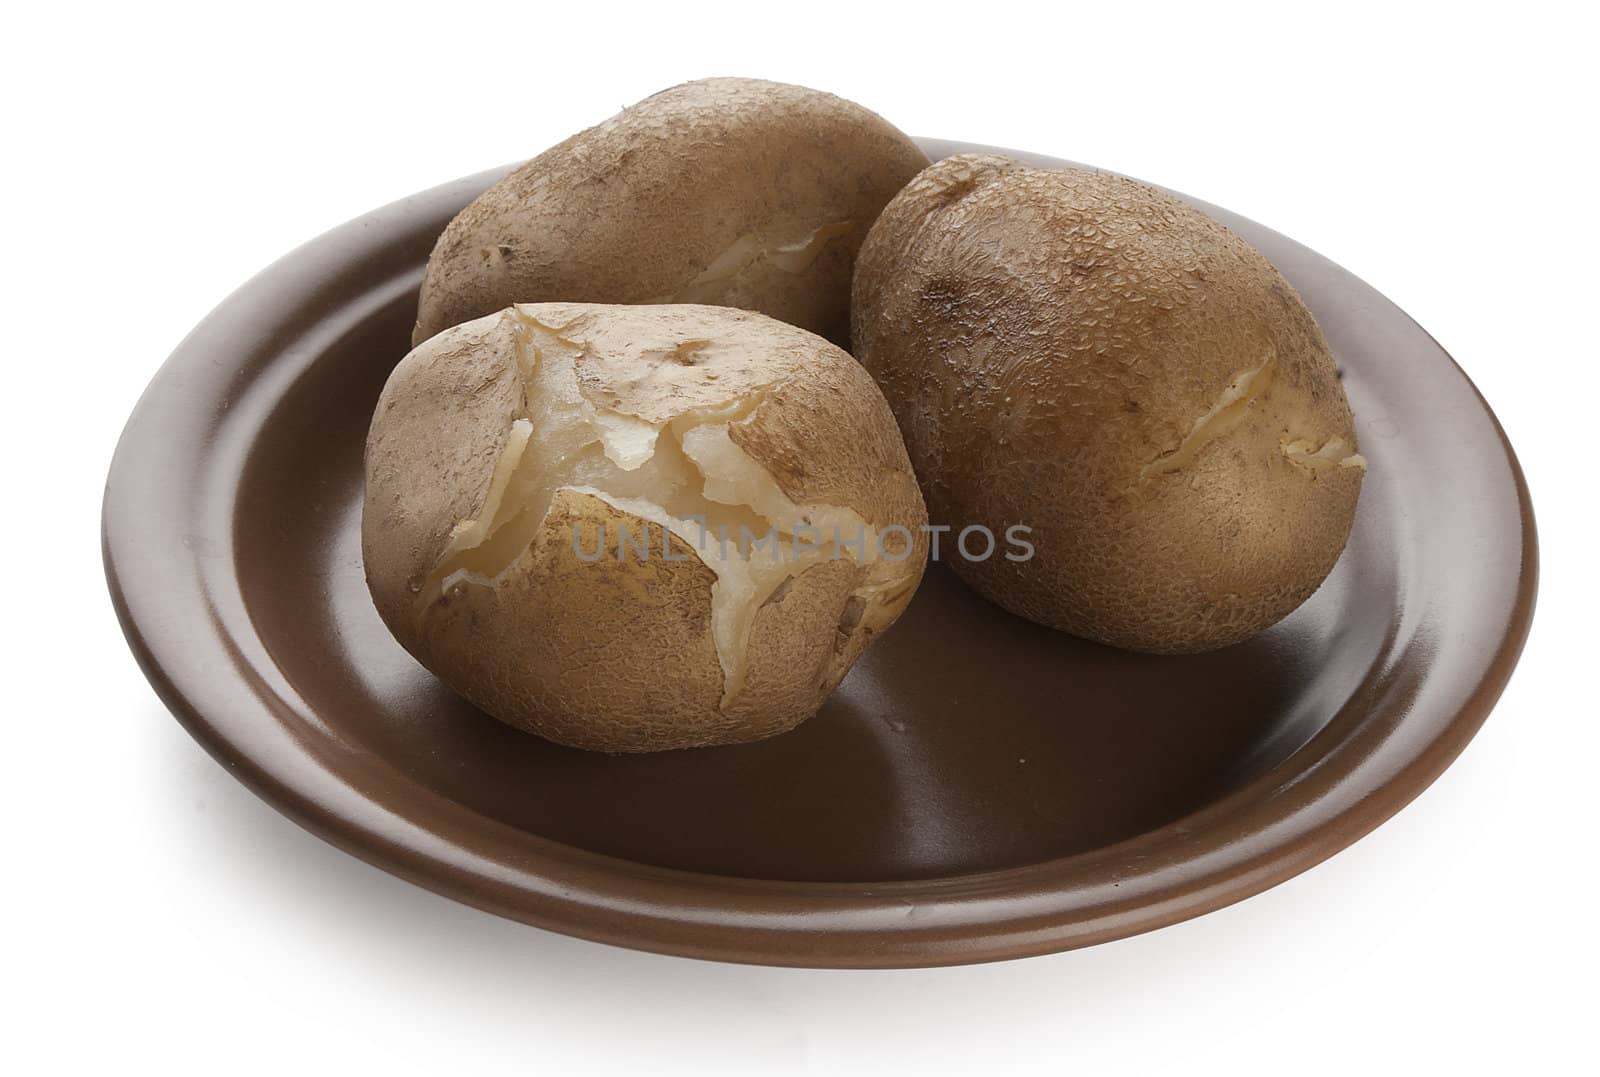 Potatoes boiled in their jacket on the brown plate